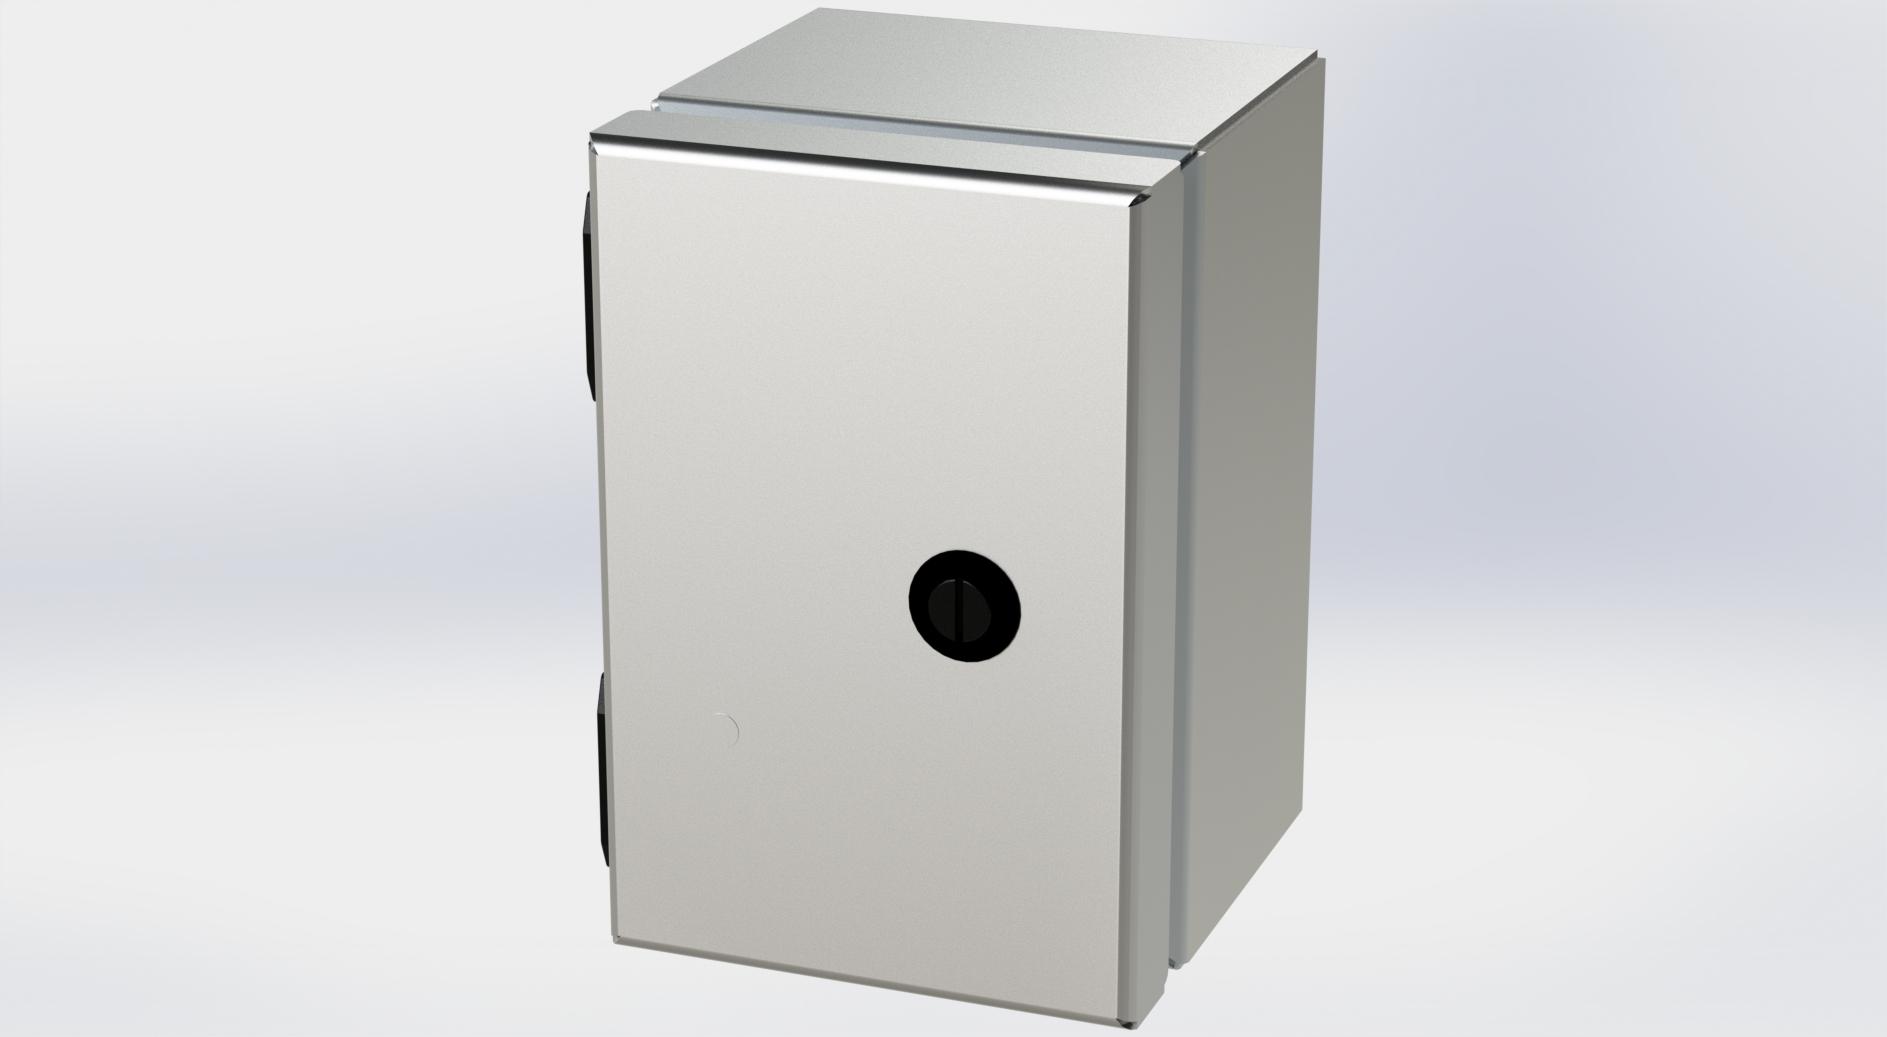 Saginaw Control SCE-604ELJSS6 S.S. ELJ Enclosure, Height:6.00", Width:4.00", Depth:4.00", #4 brushed finish on all exterior surfaces. Optional sub-panels are powder coated white.